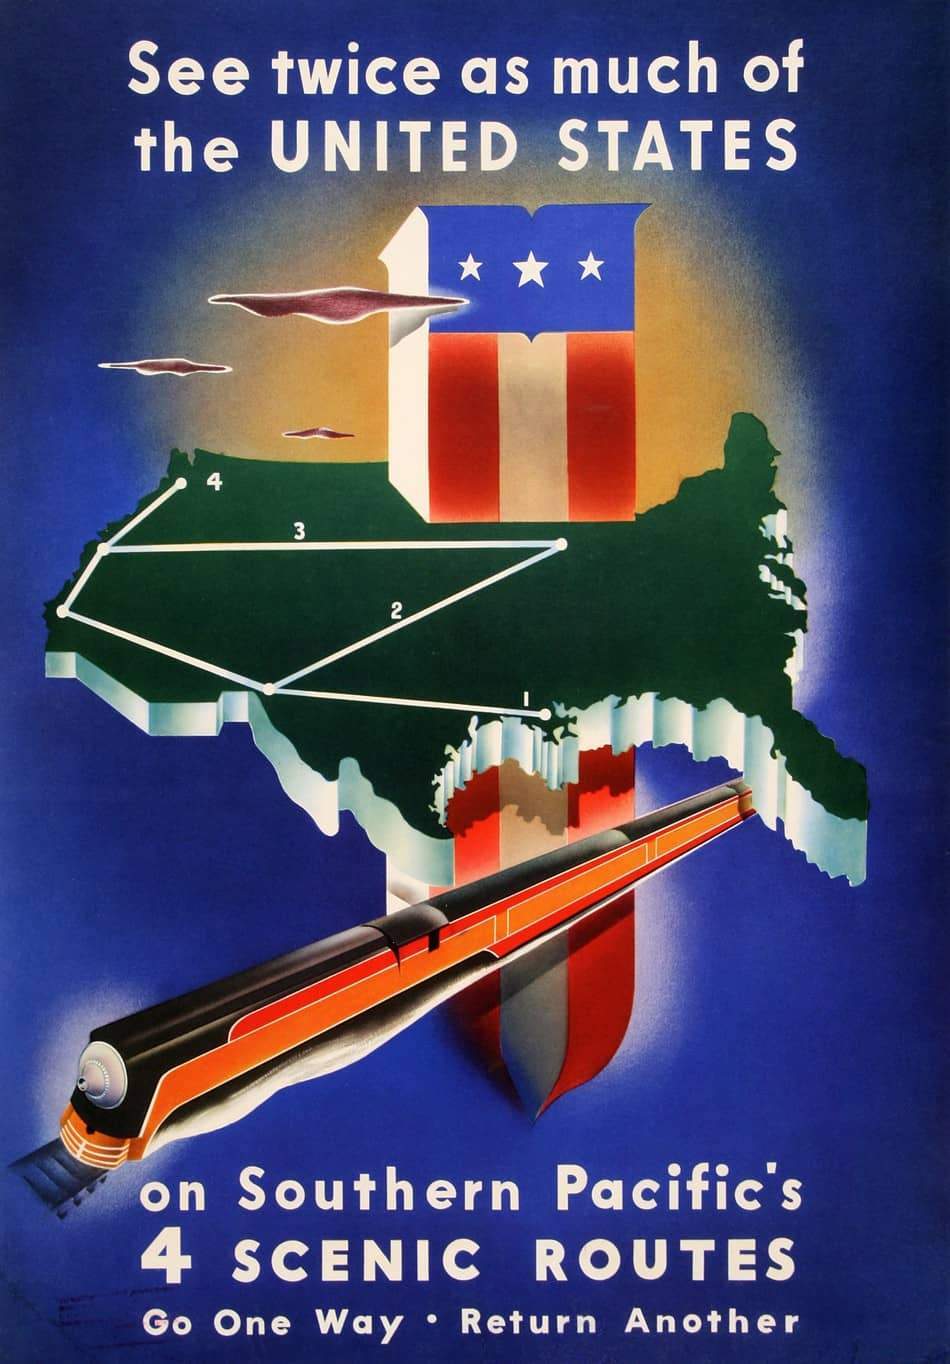 Southern Pacific Original 1938 Award Winning Poster by Stanley Brower